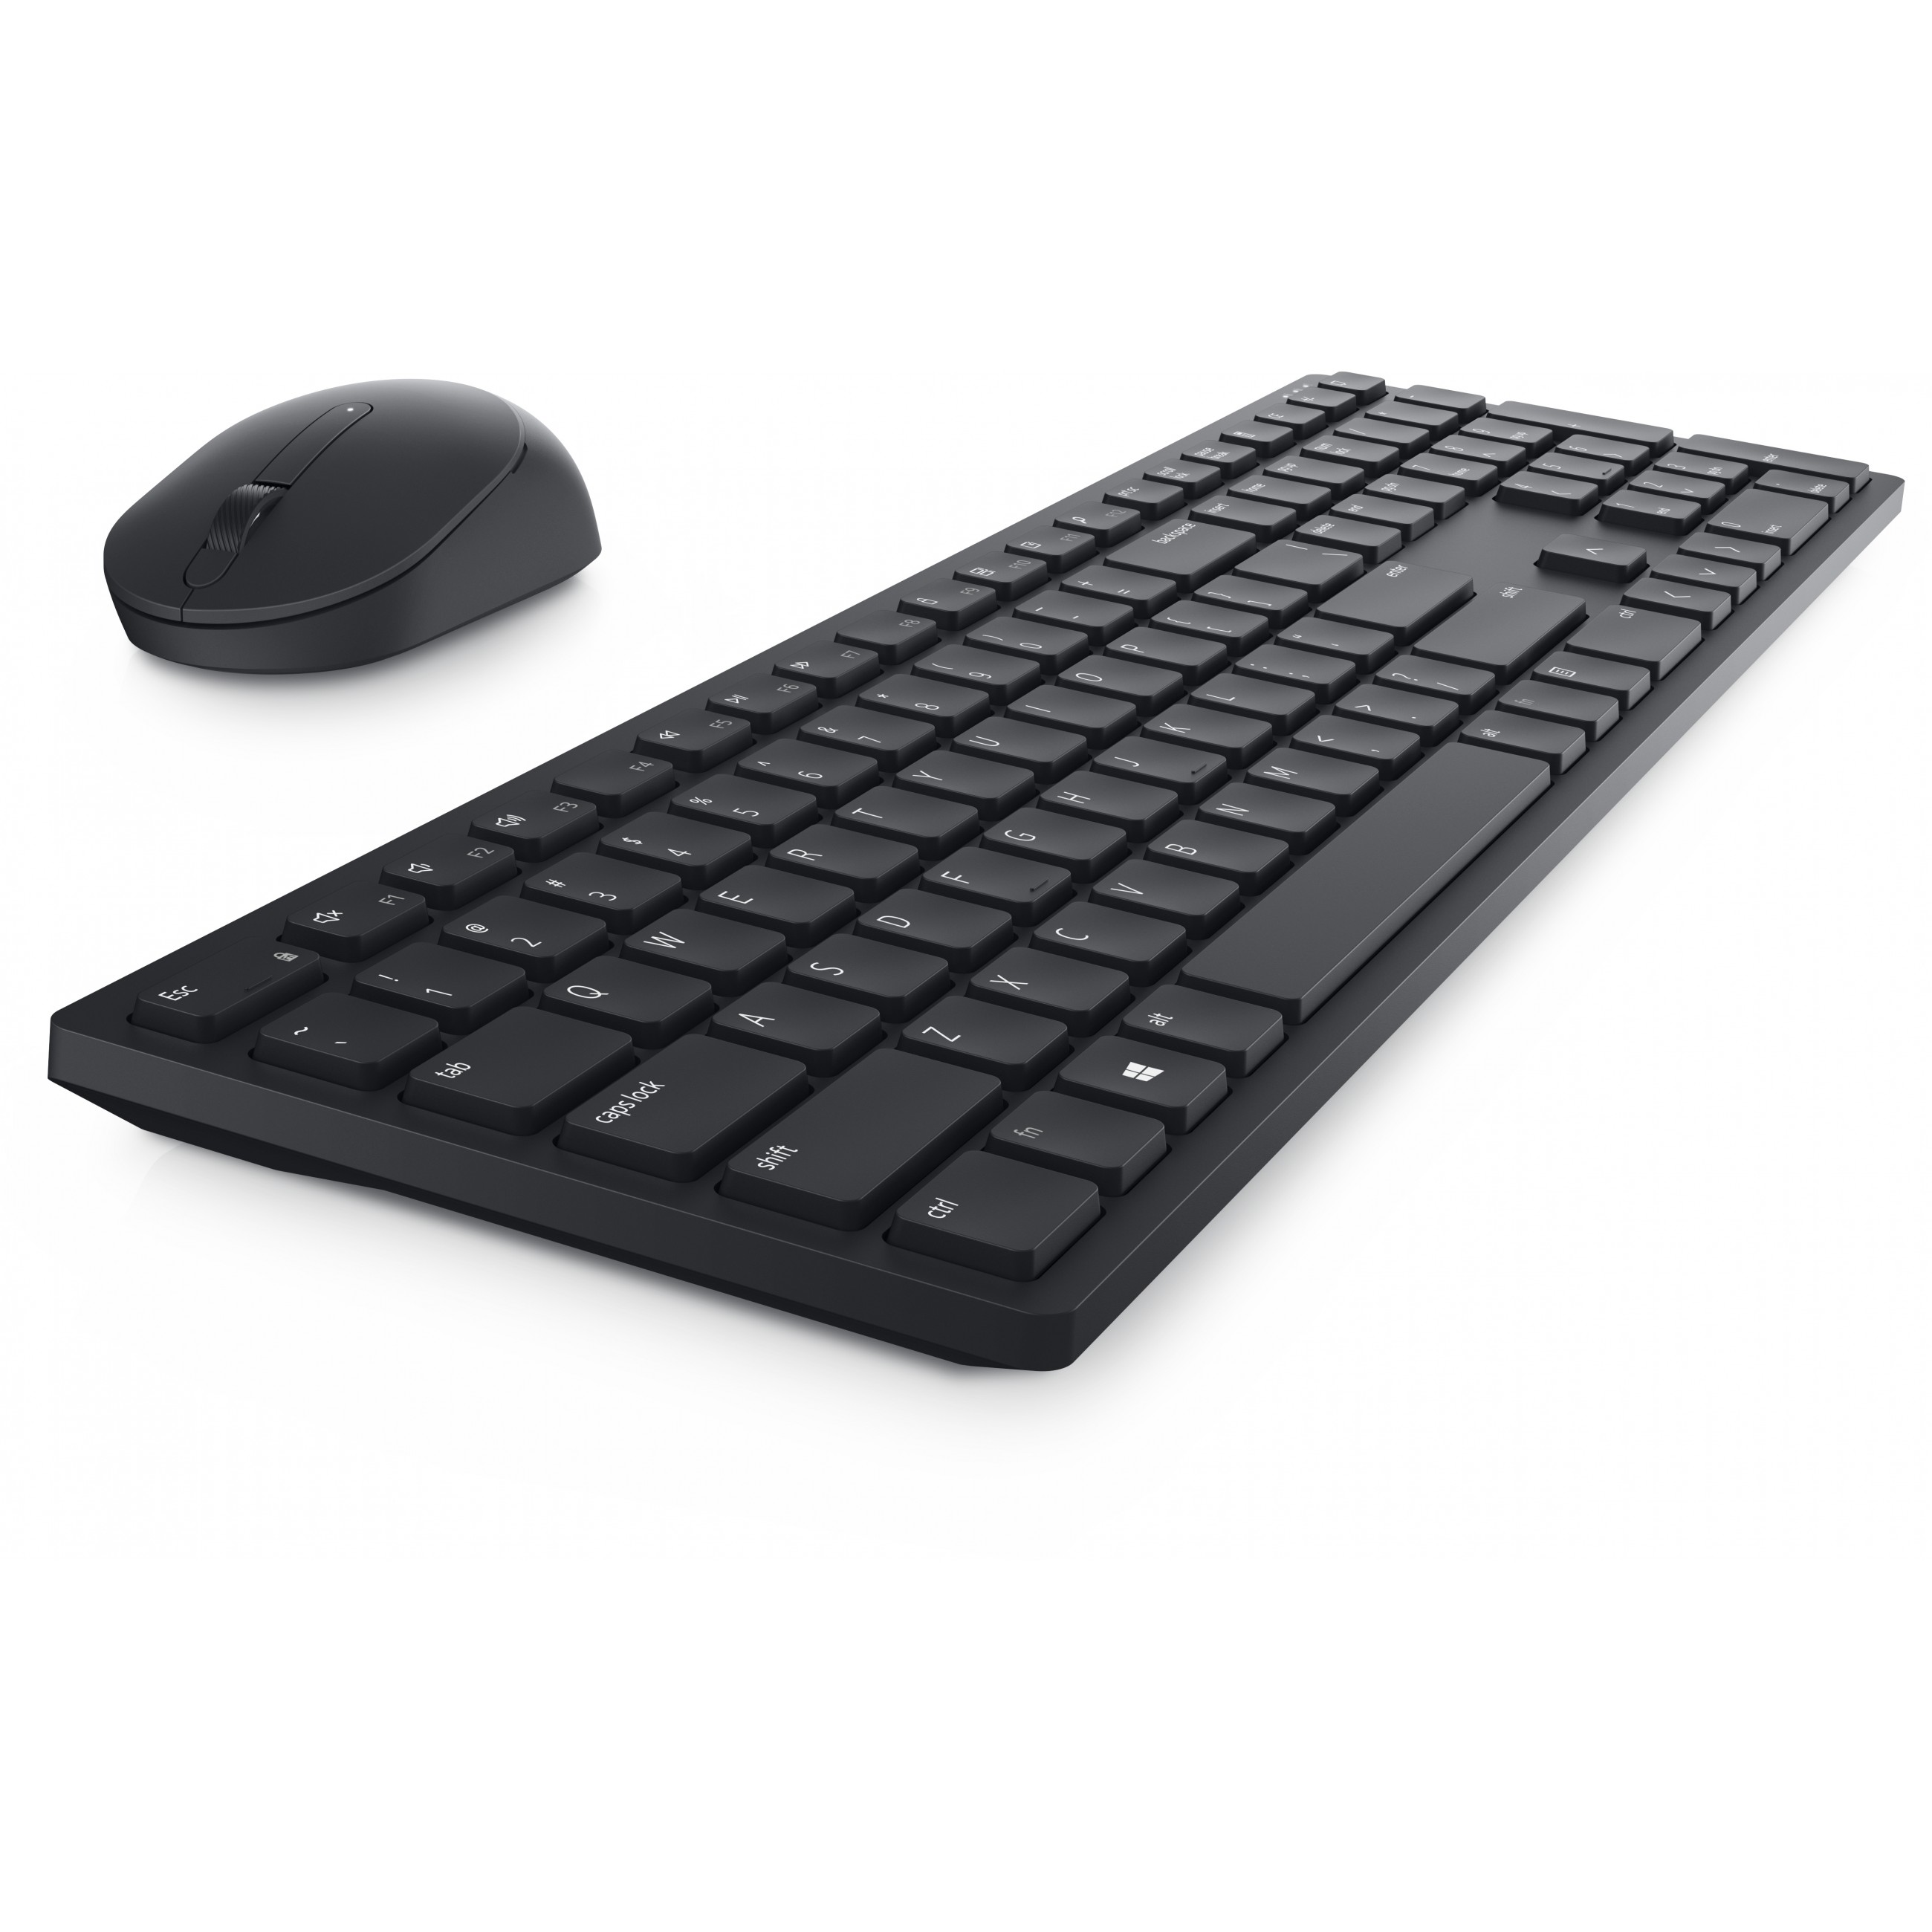 DELL Pro Wireless Keyboard and Mouse - KM5221W